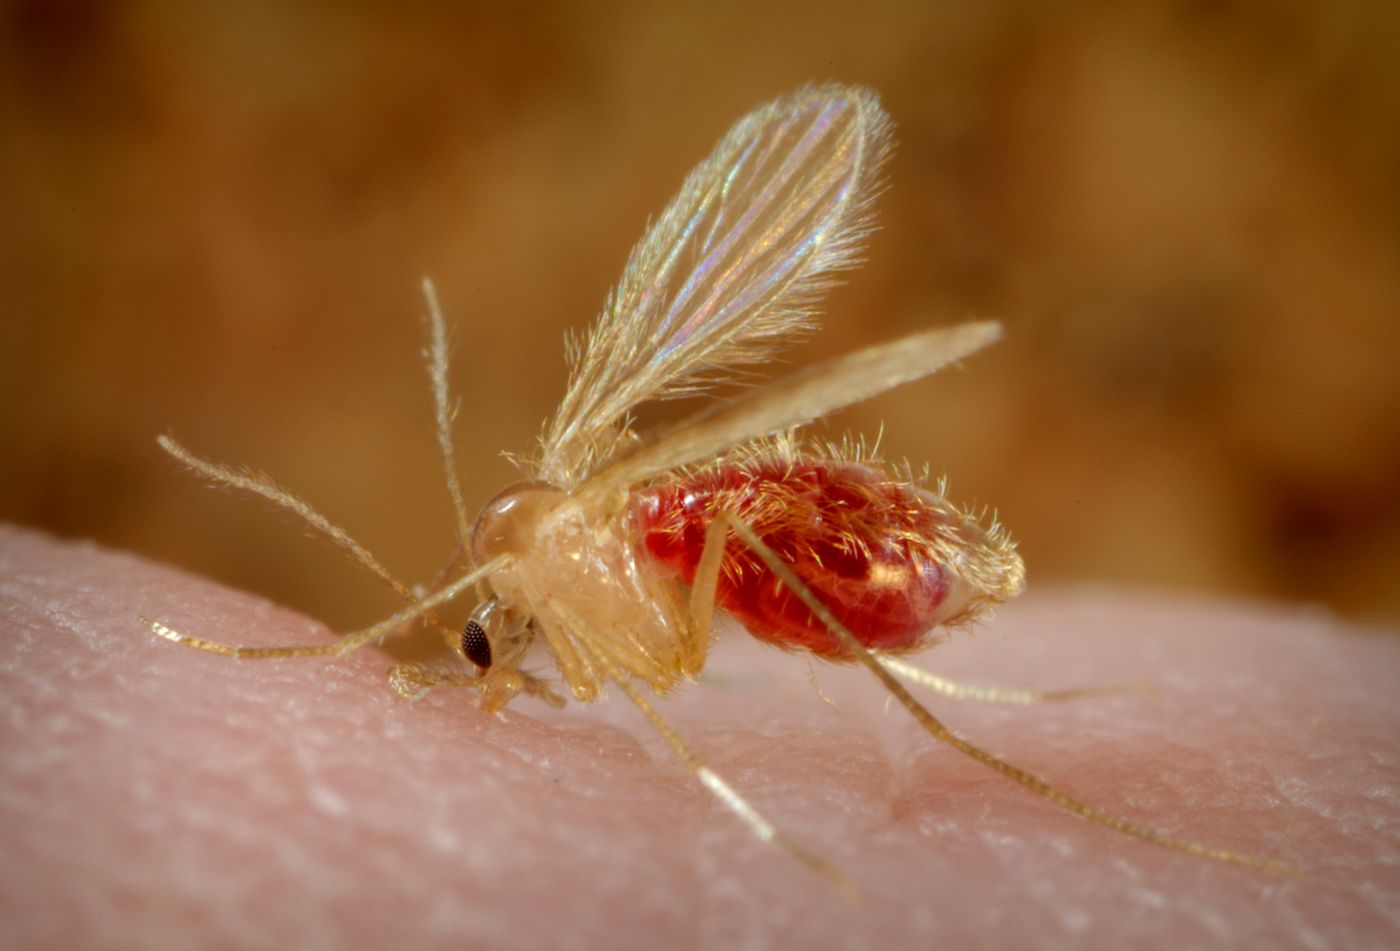 Sandflies such as this P. papatasi, are responsible for the spread of the vector-borne parasitic disease leishmaniasis, which is caused by the obligate intracellular protozoa of the genus Leishmania. / Credit:Centers for Disease Control and Prevention/Wikimedia Commons